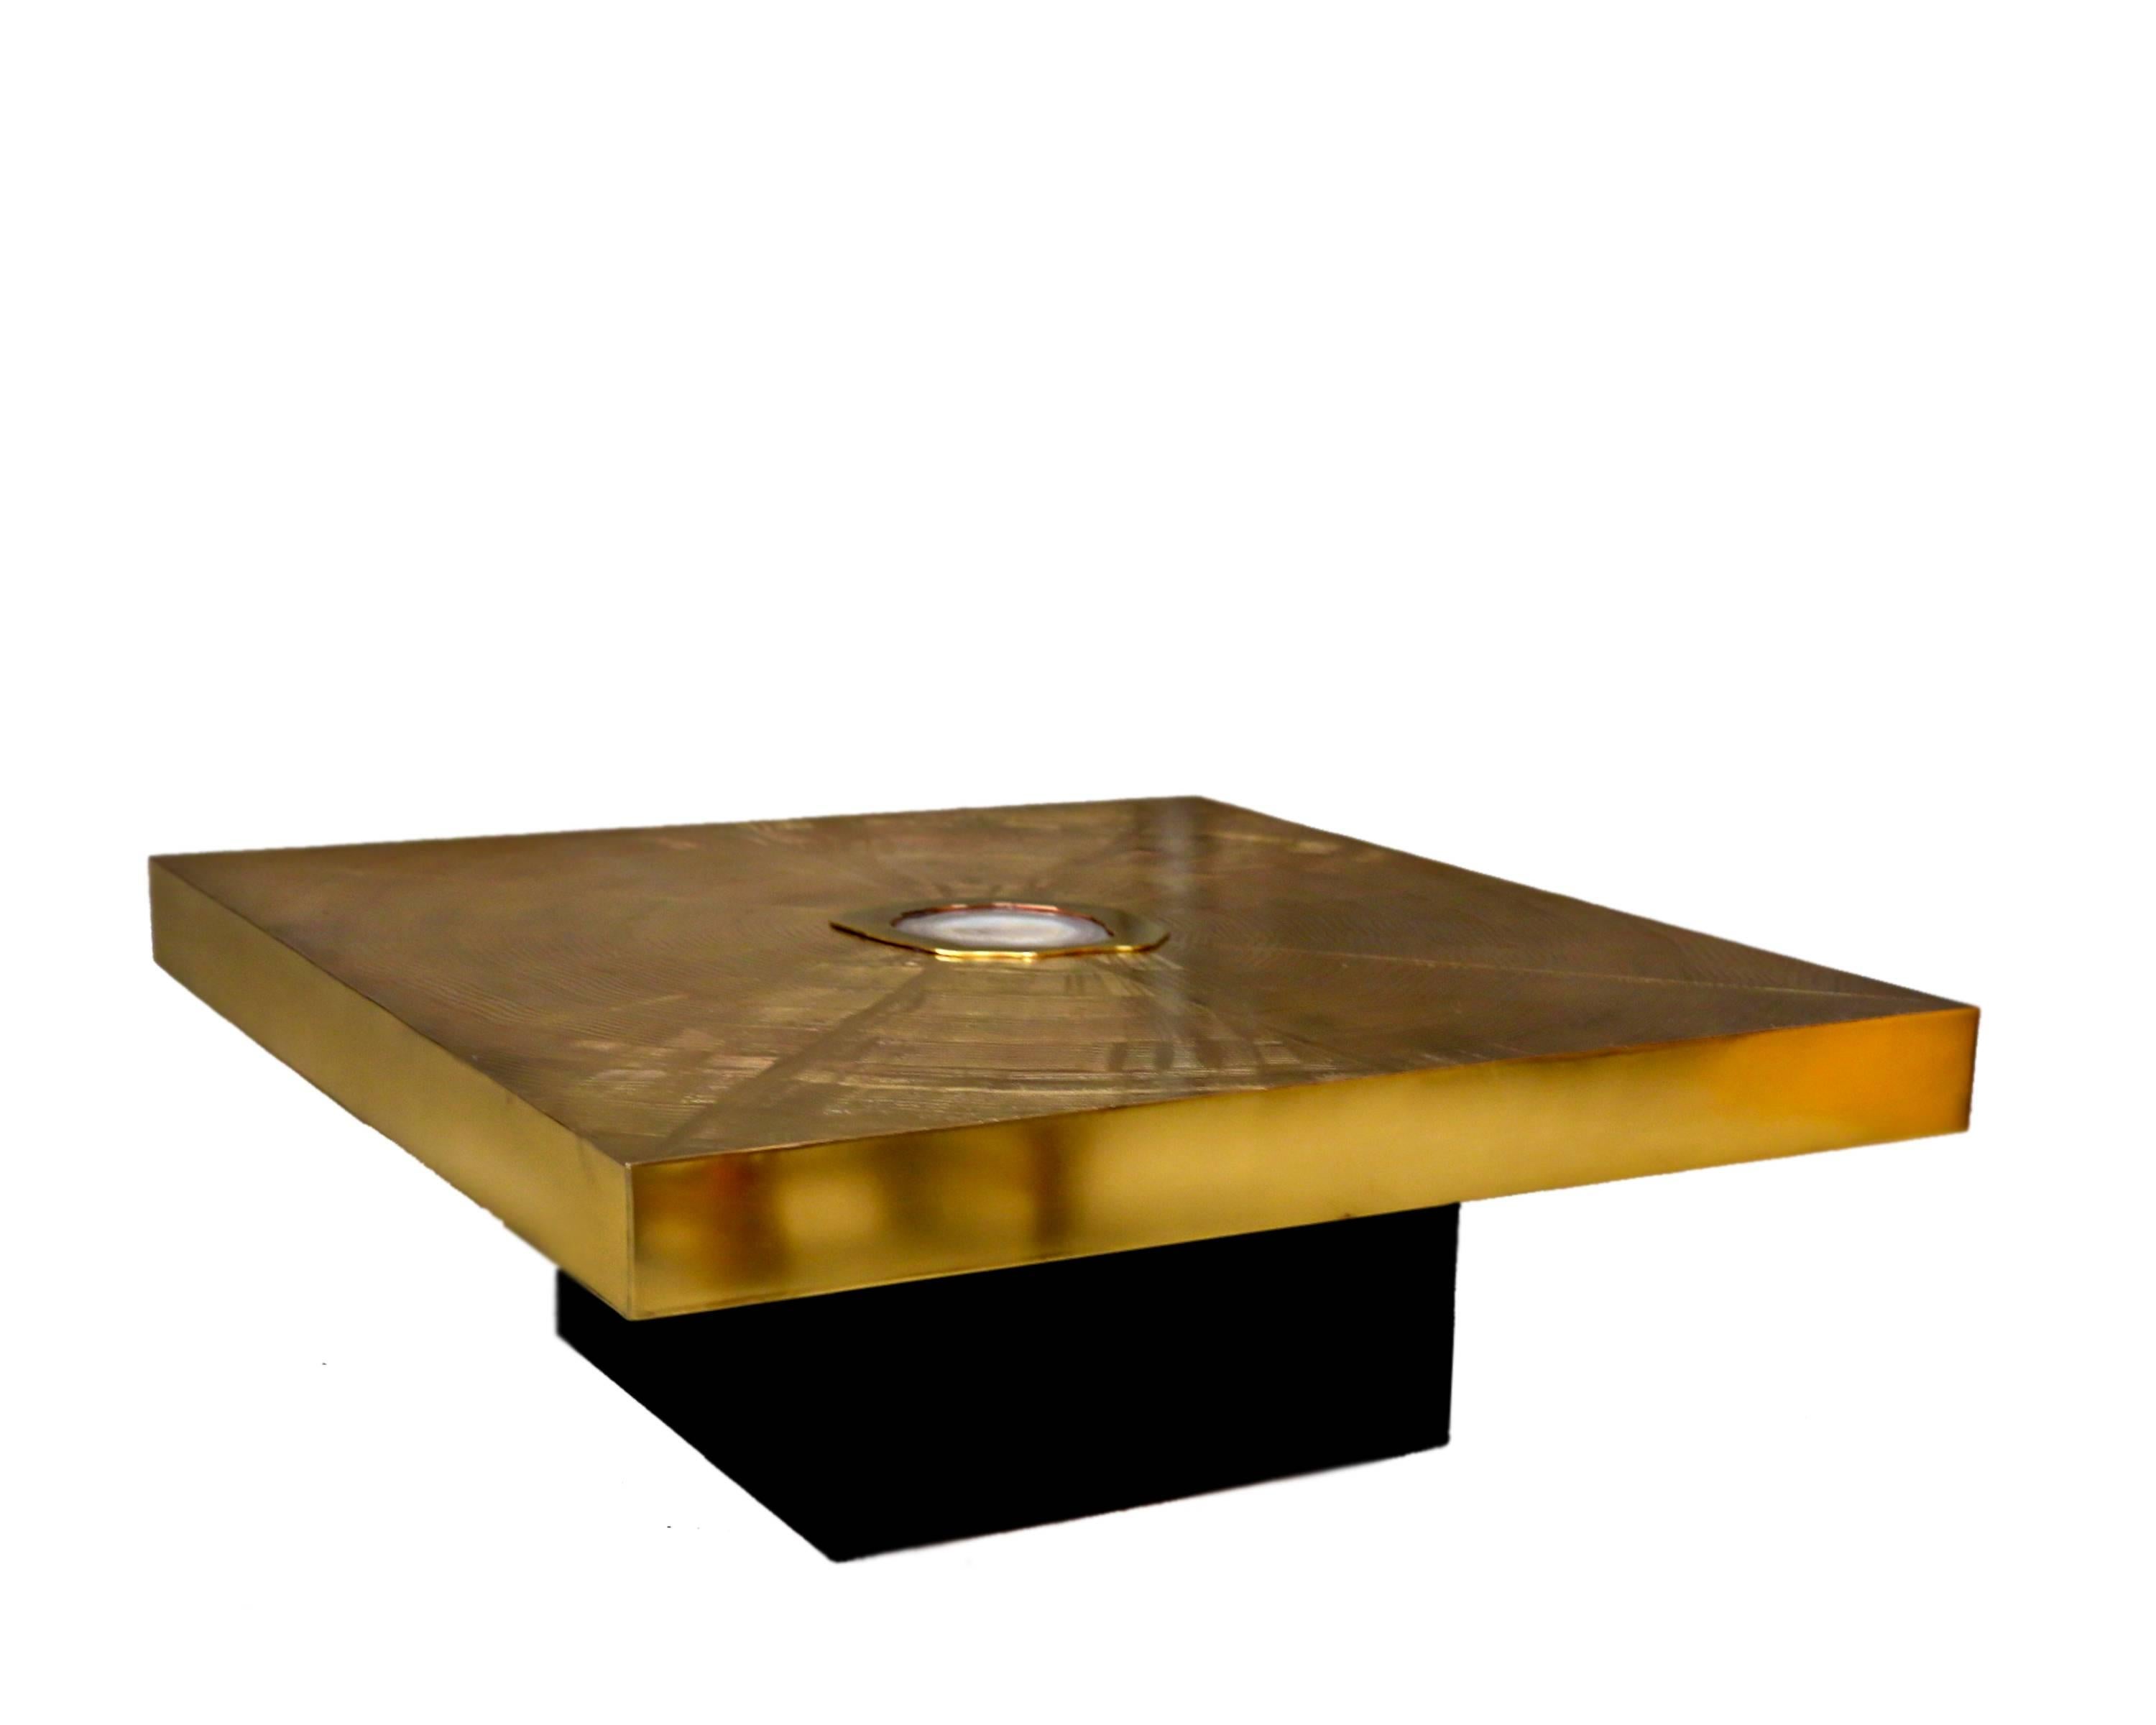 Interesting acid etched brass coffe table with agate inset. Clearly inspired by George Mathias. 

Very nice work of art.
signed by artist.

Brass acid etched tables with agate stone inlay are very popular right now.
Bellalu is specialised in